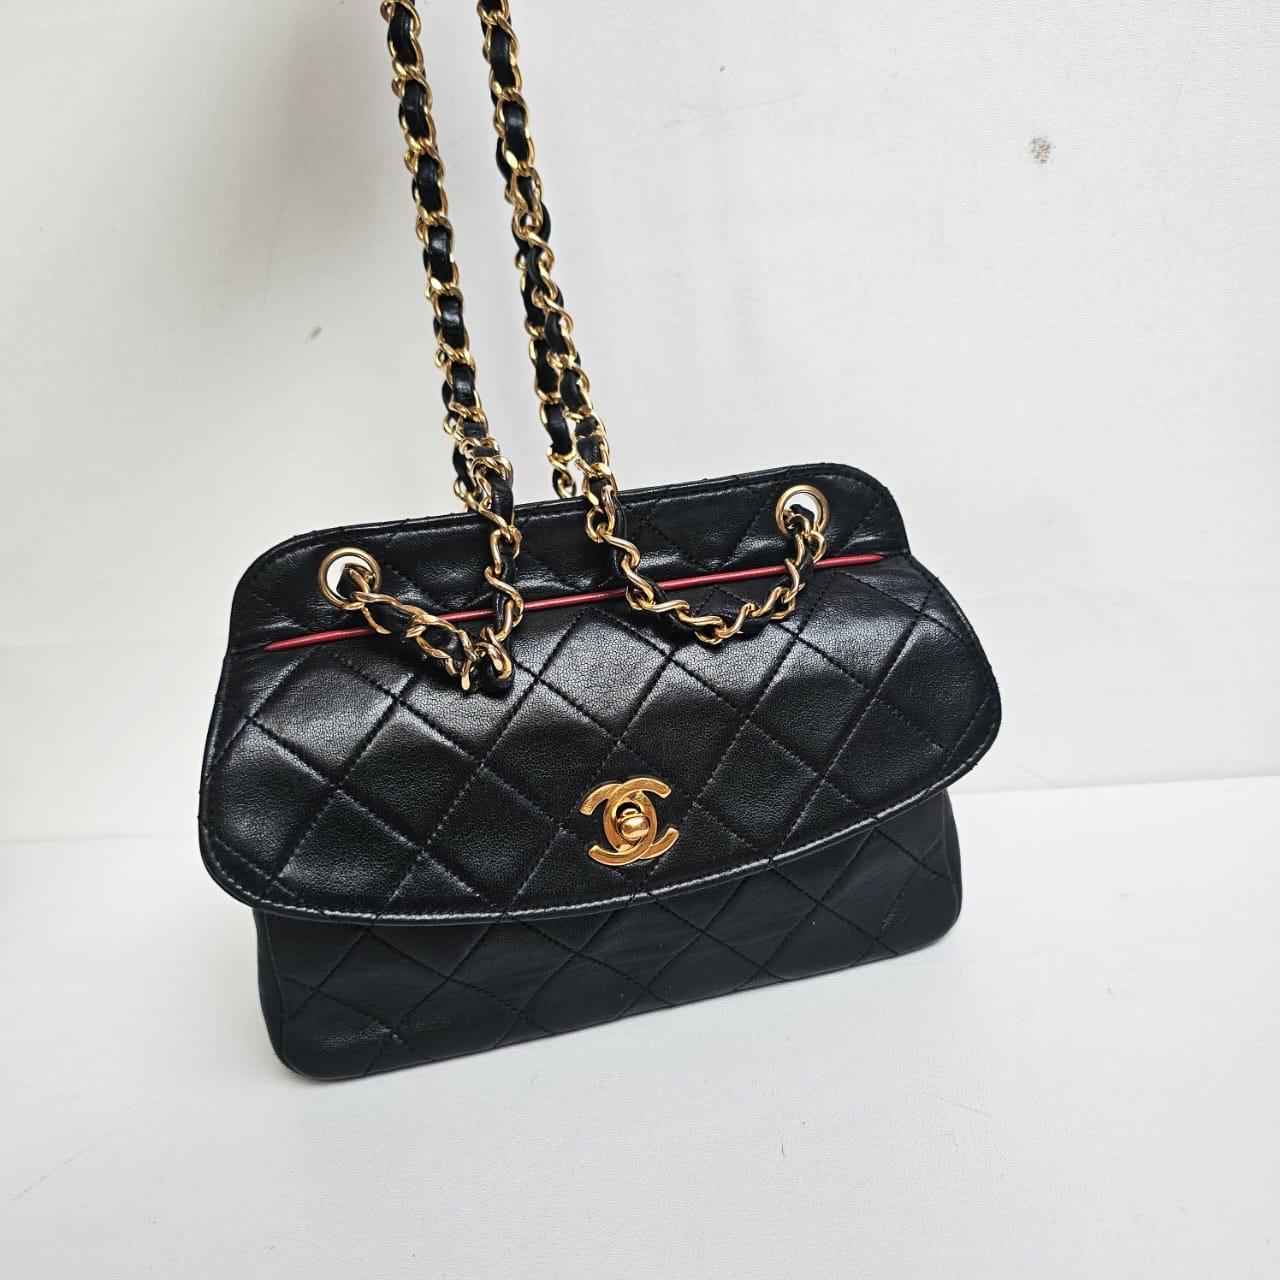 Vintage Chanel Black Lambskin Quilted Mini Flap Bag For Sale 13